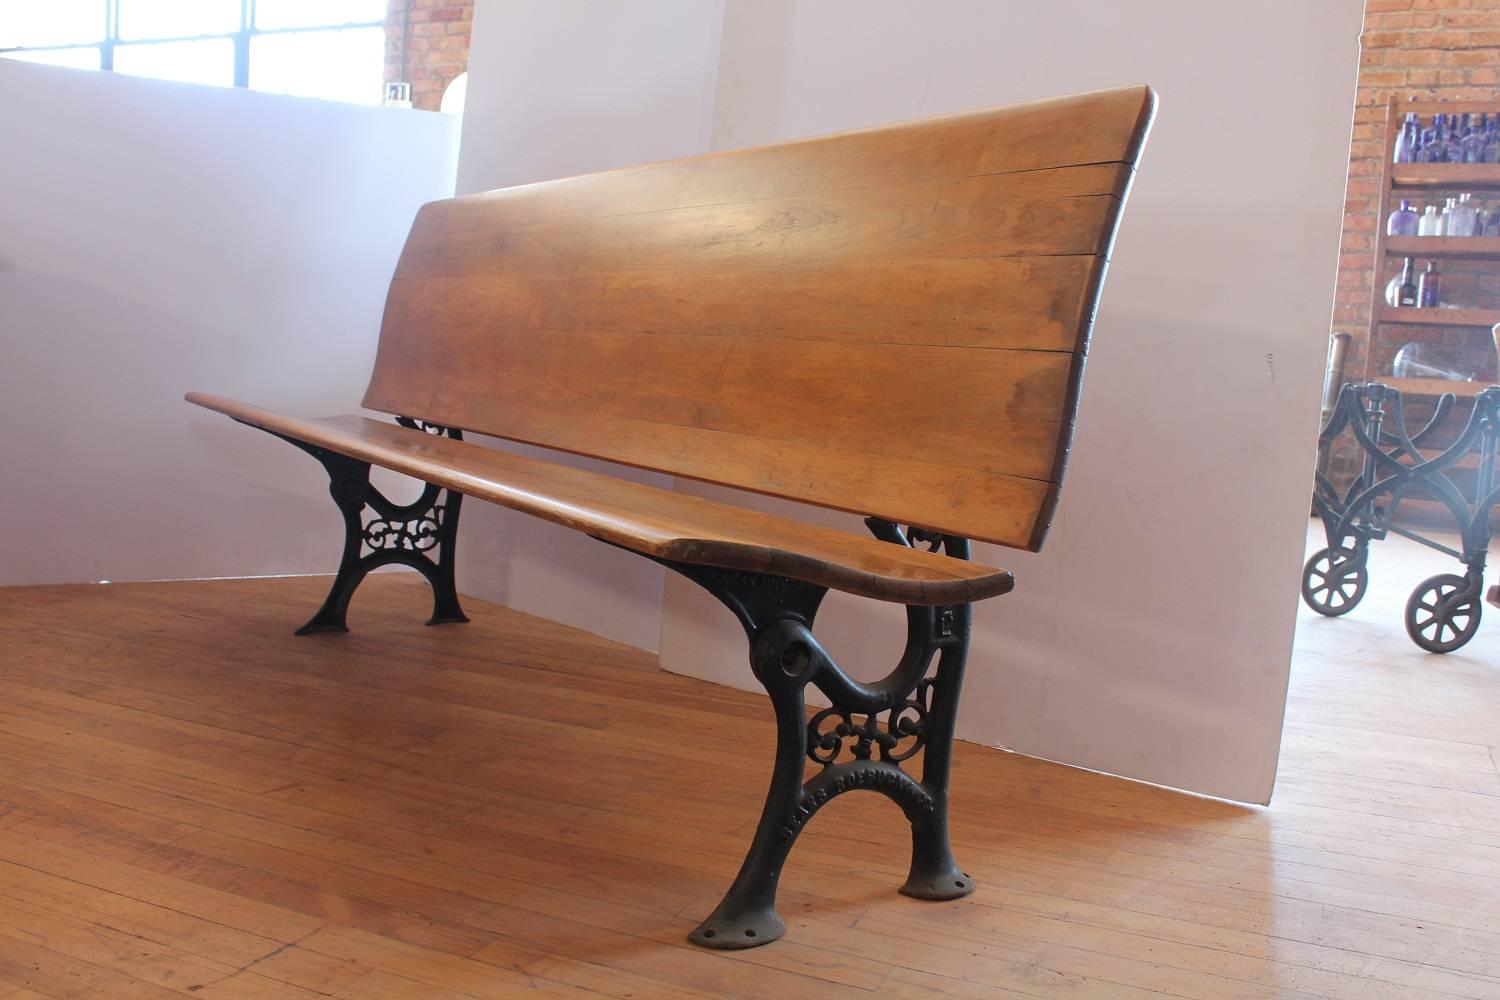 Antique American School wood bench with cast iron bases. More available.